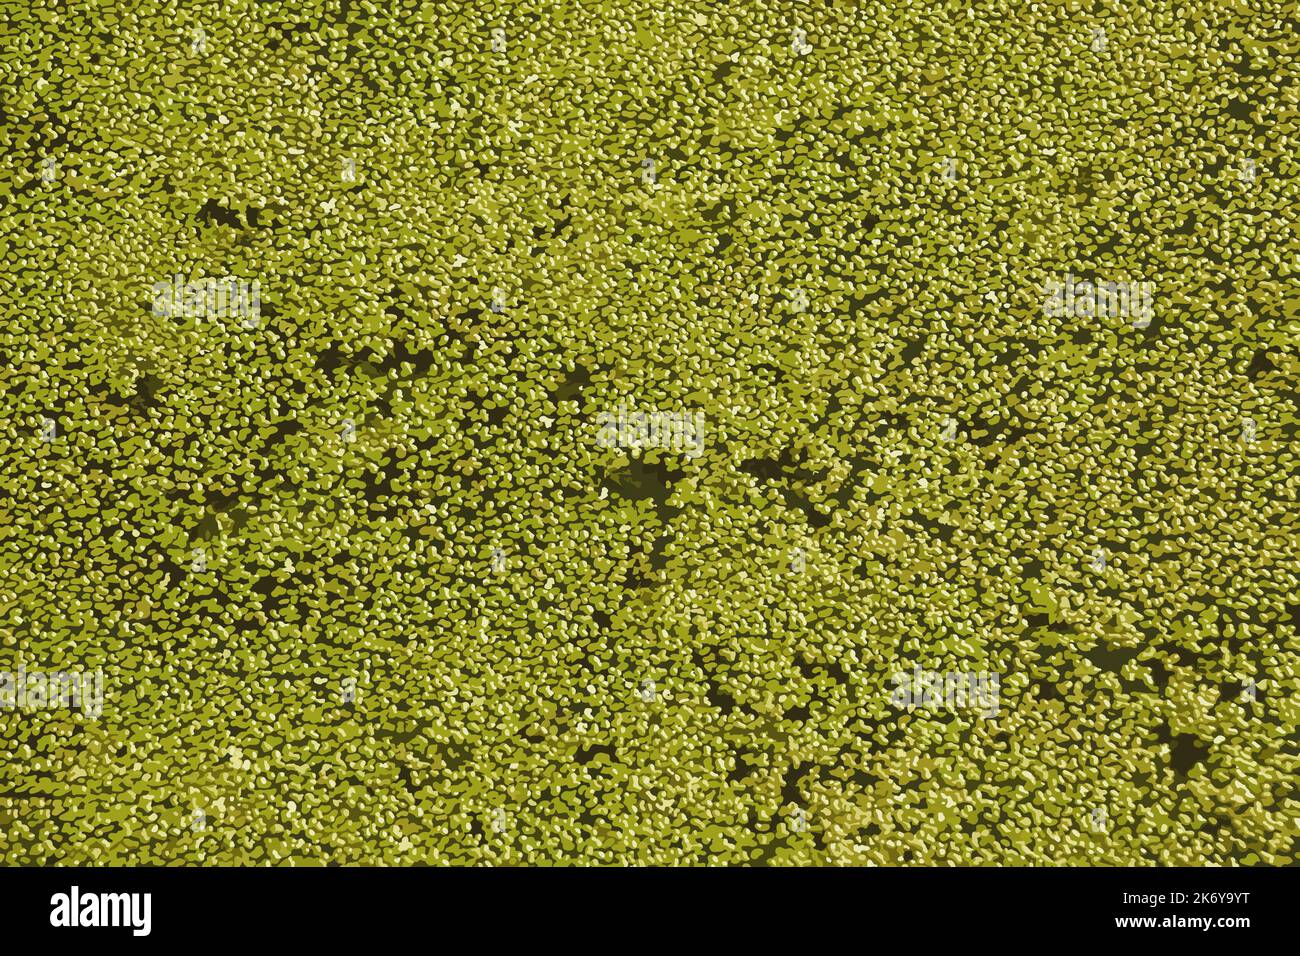 Realistic vector illustration of a background with abstract pattern made of aquatic plant Lemna. Green leaves of duckweeds on sunny day Stock Photo